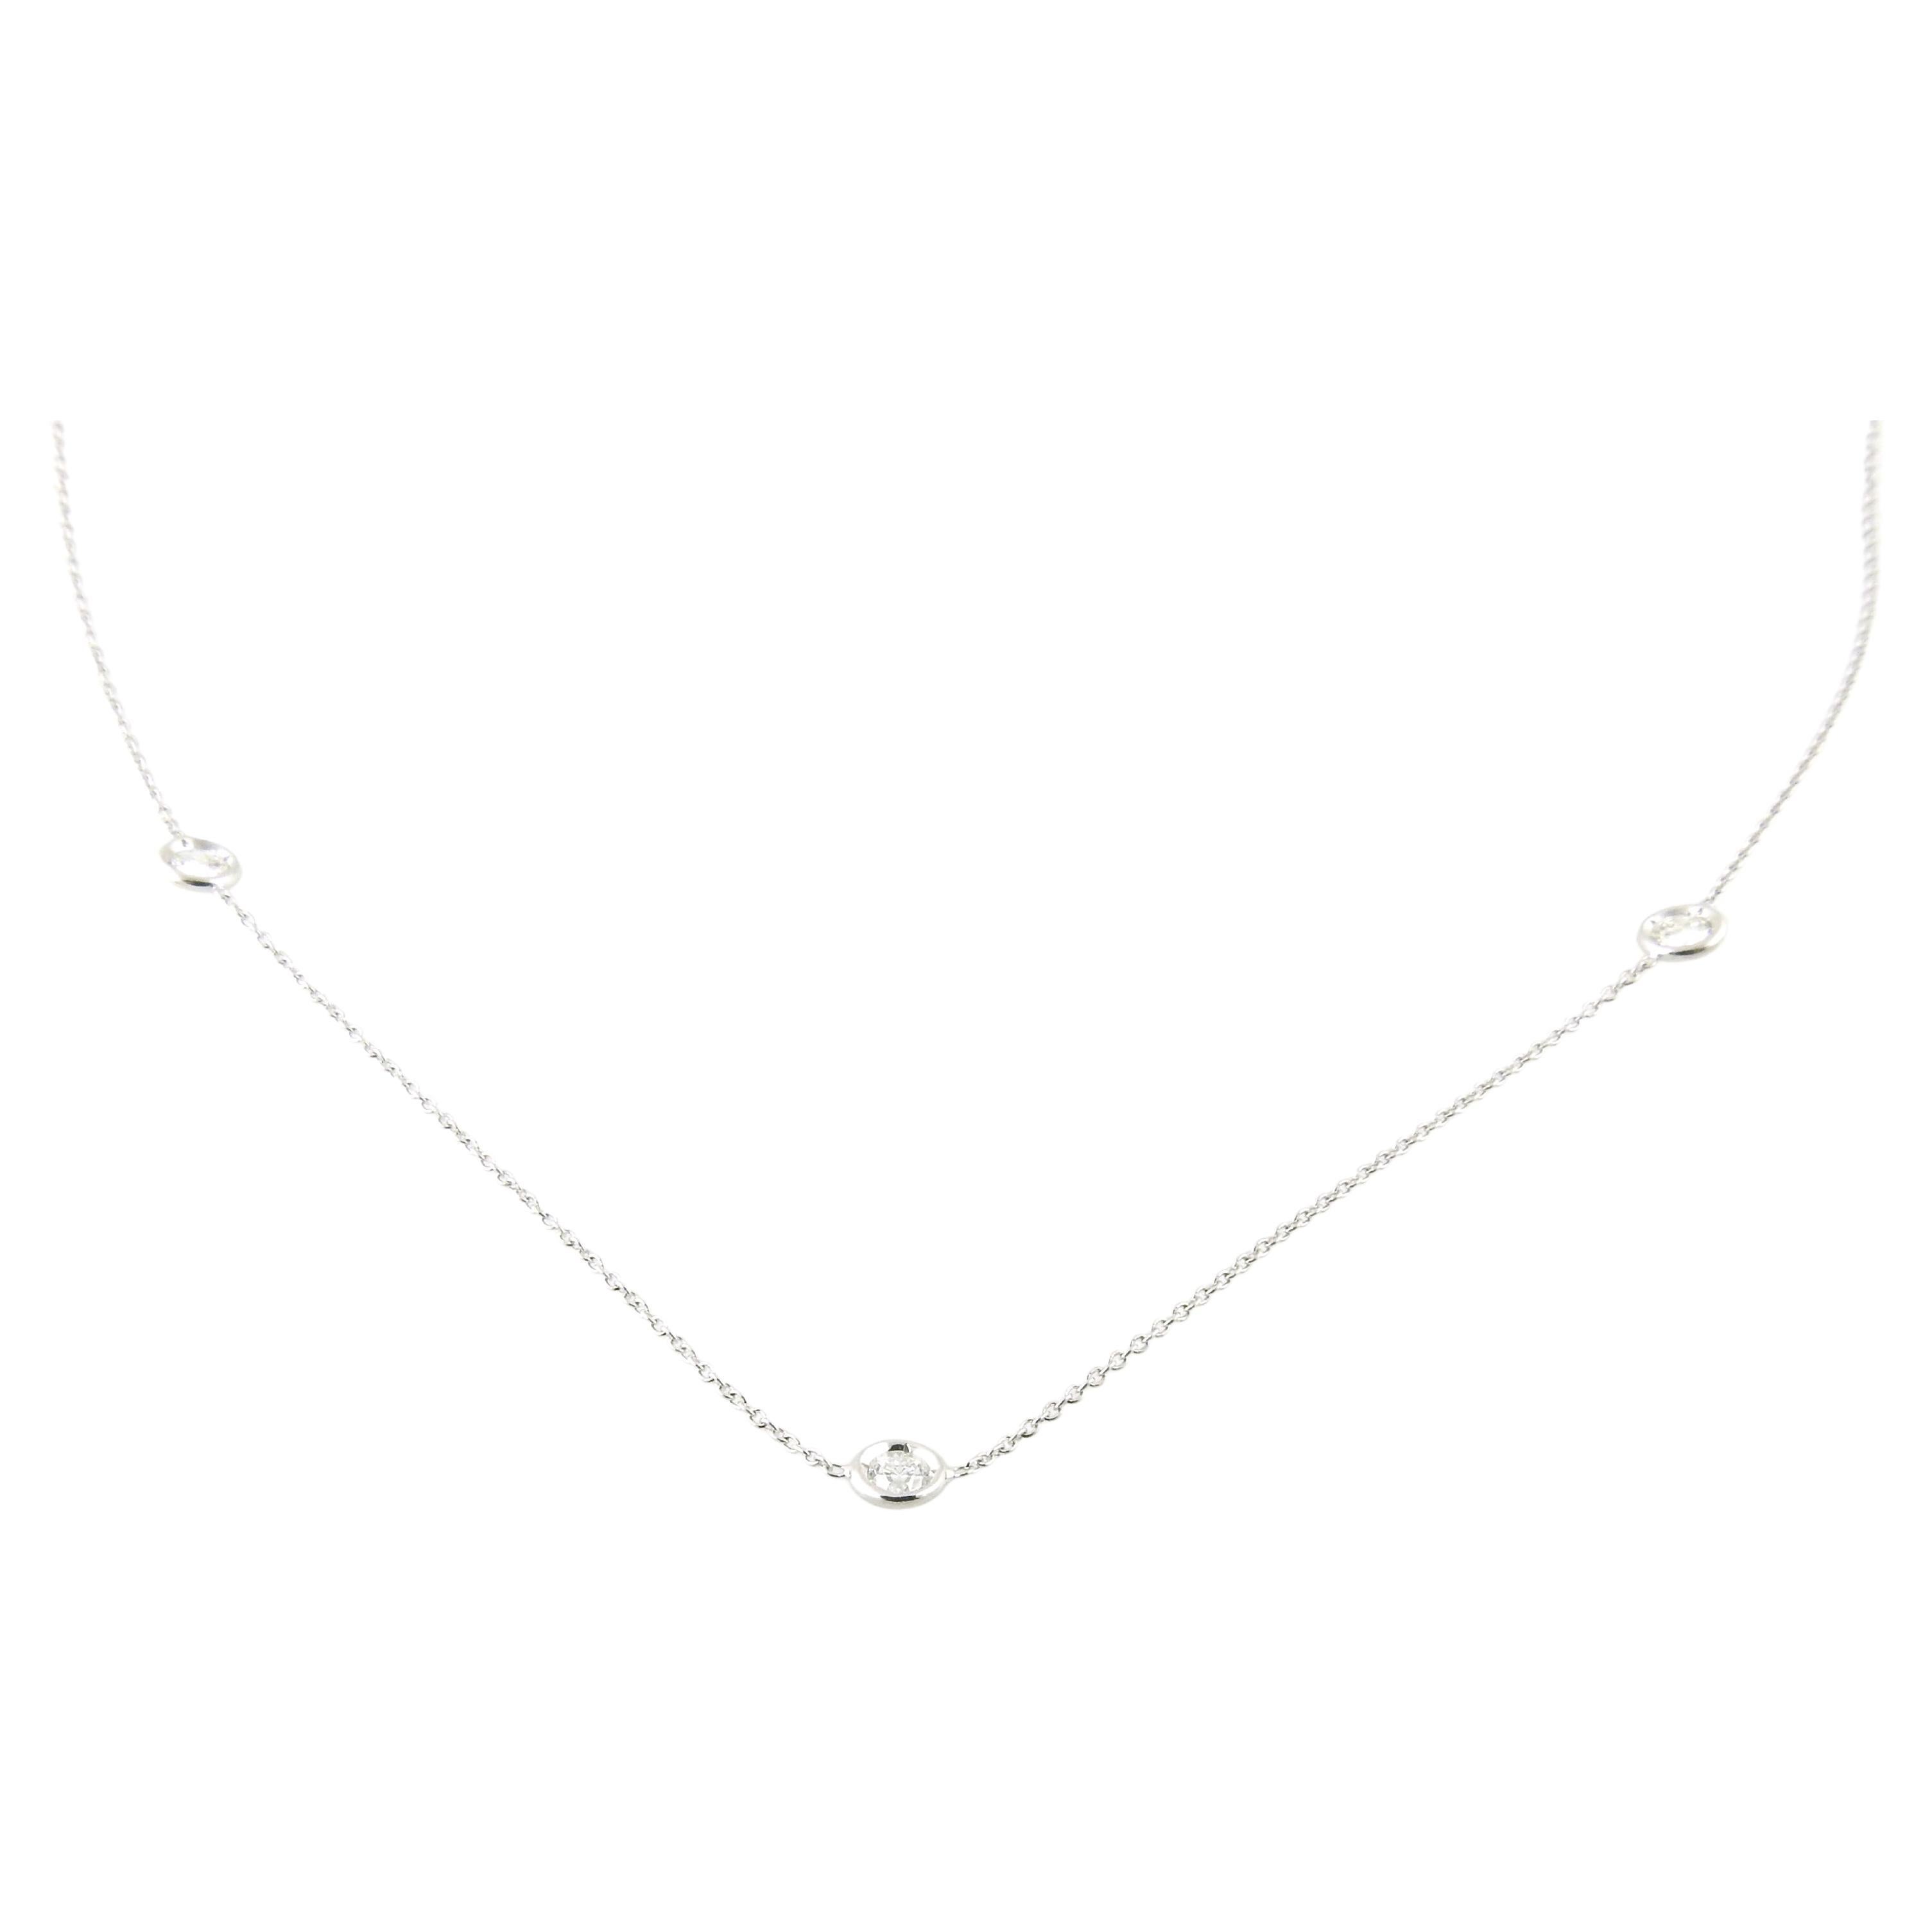 Roberto Coin 18K White Gold Diamonds by the Inch 5 Station Necklace